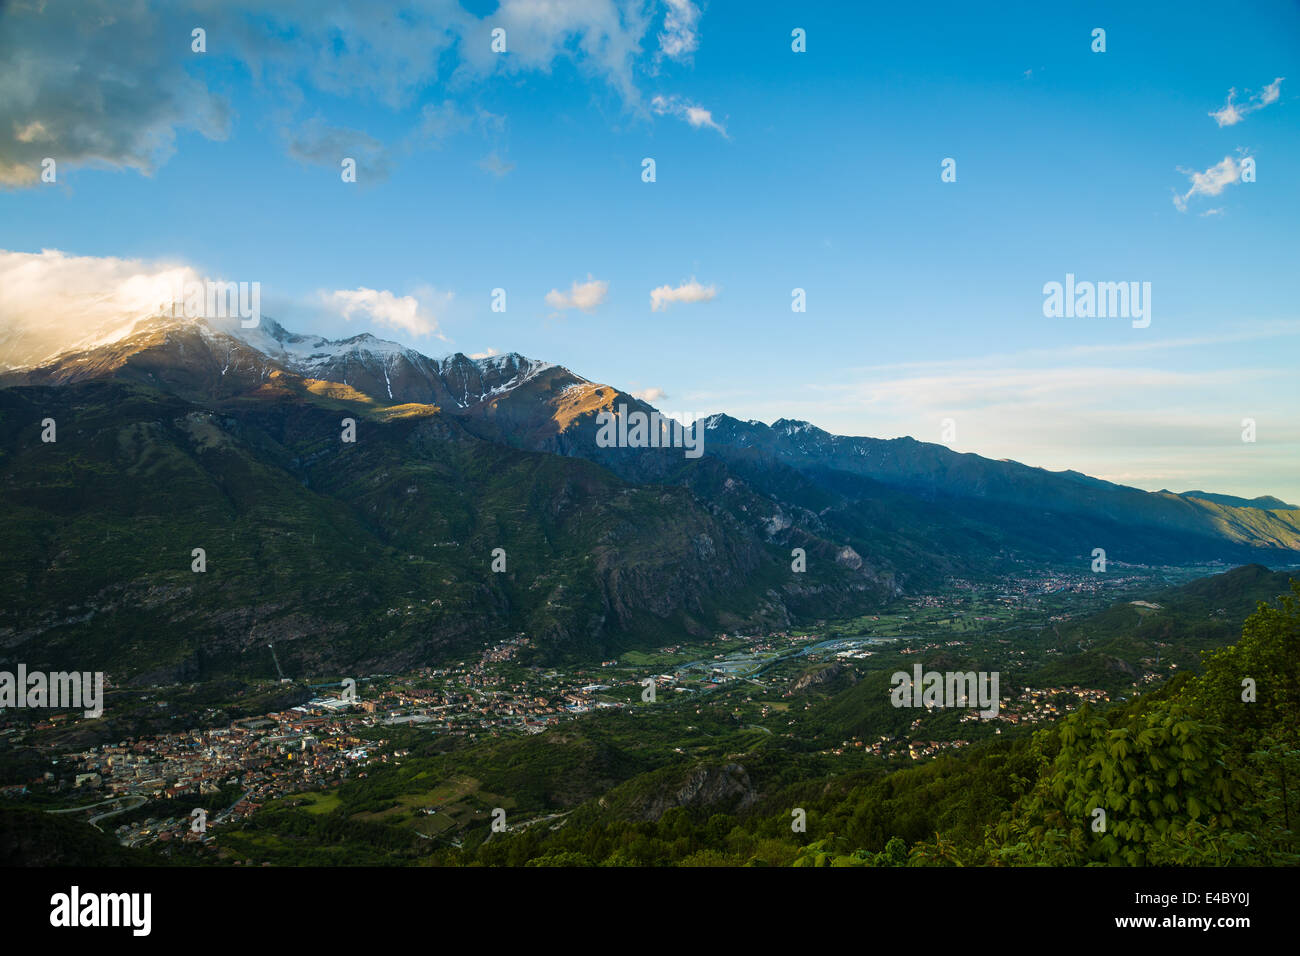 View east along the Susa Valley, Italy from Frais. The mountain of Rocciamelone (3538m) on the left. Stock Photo